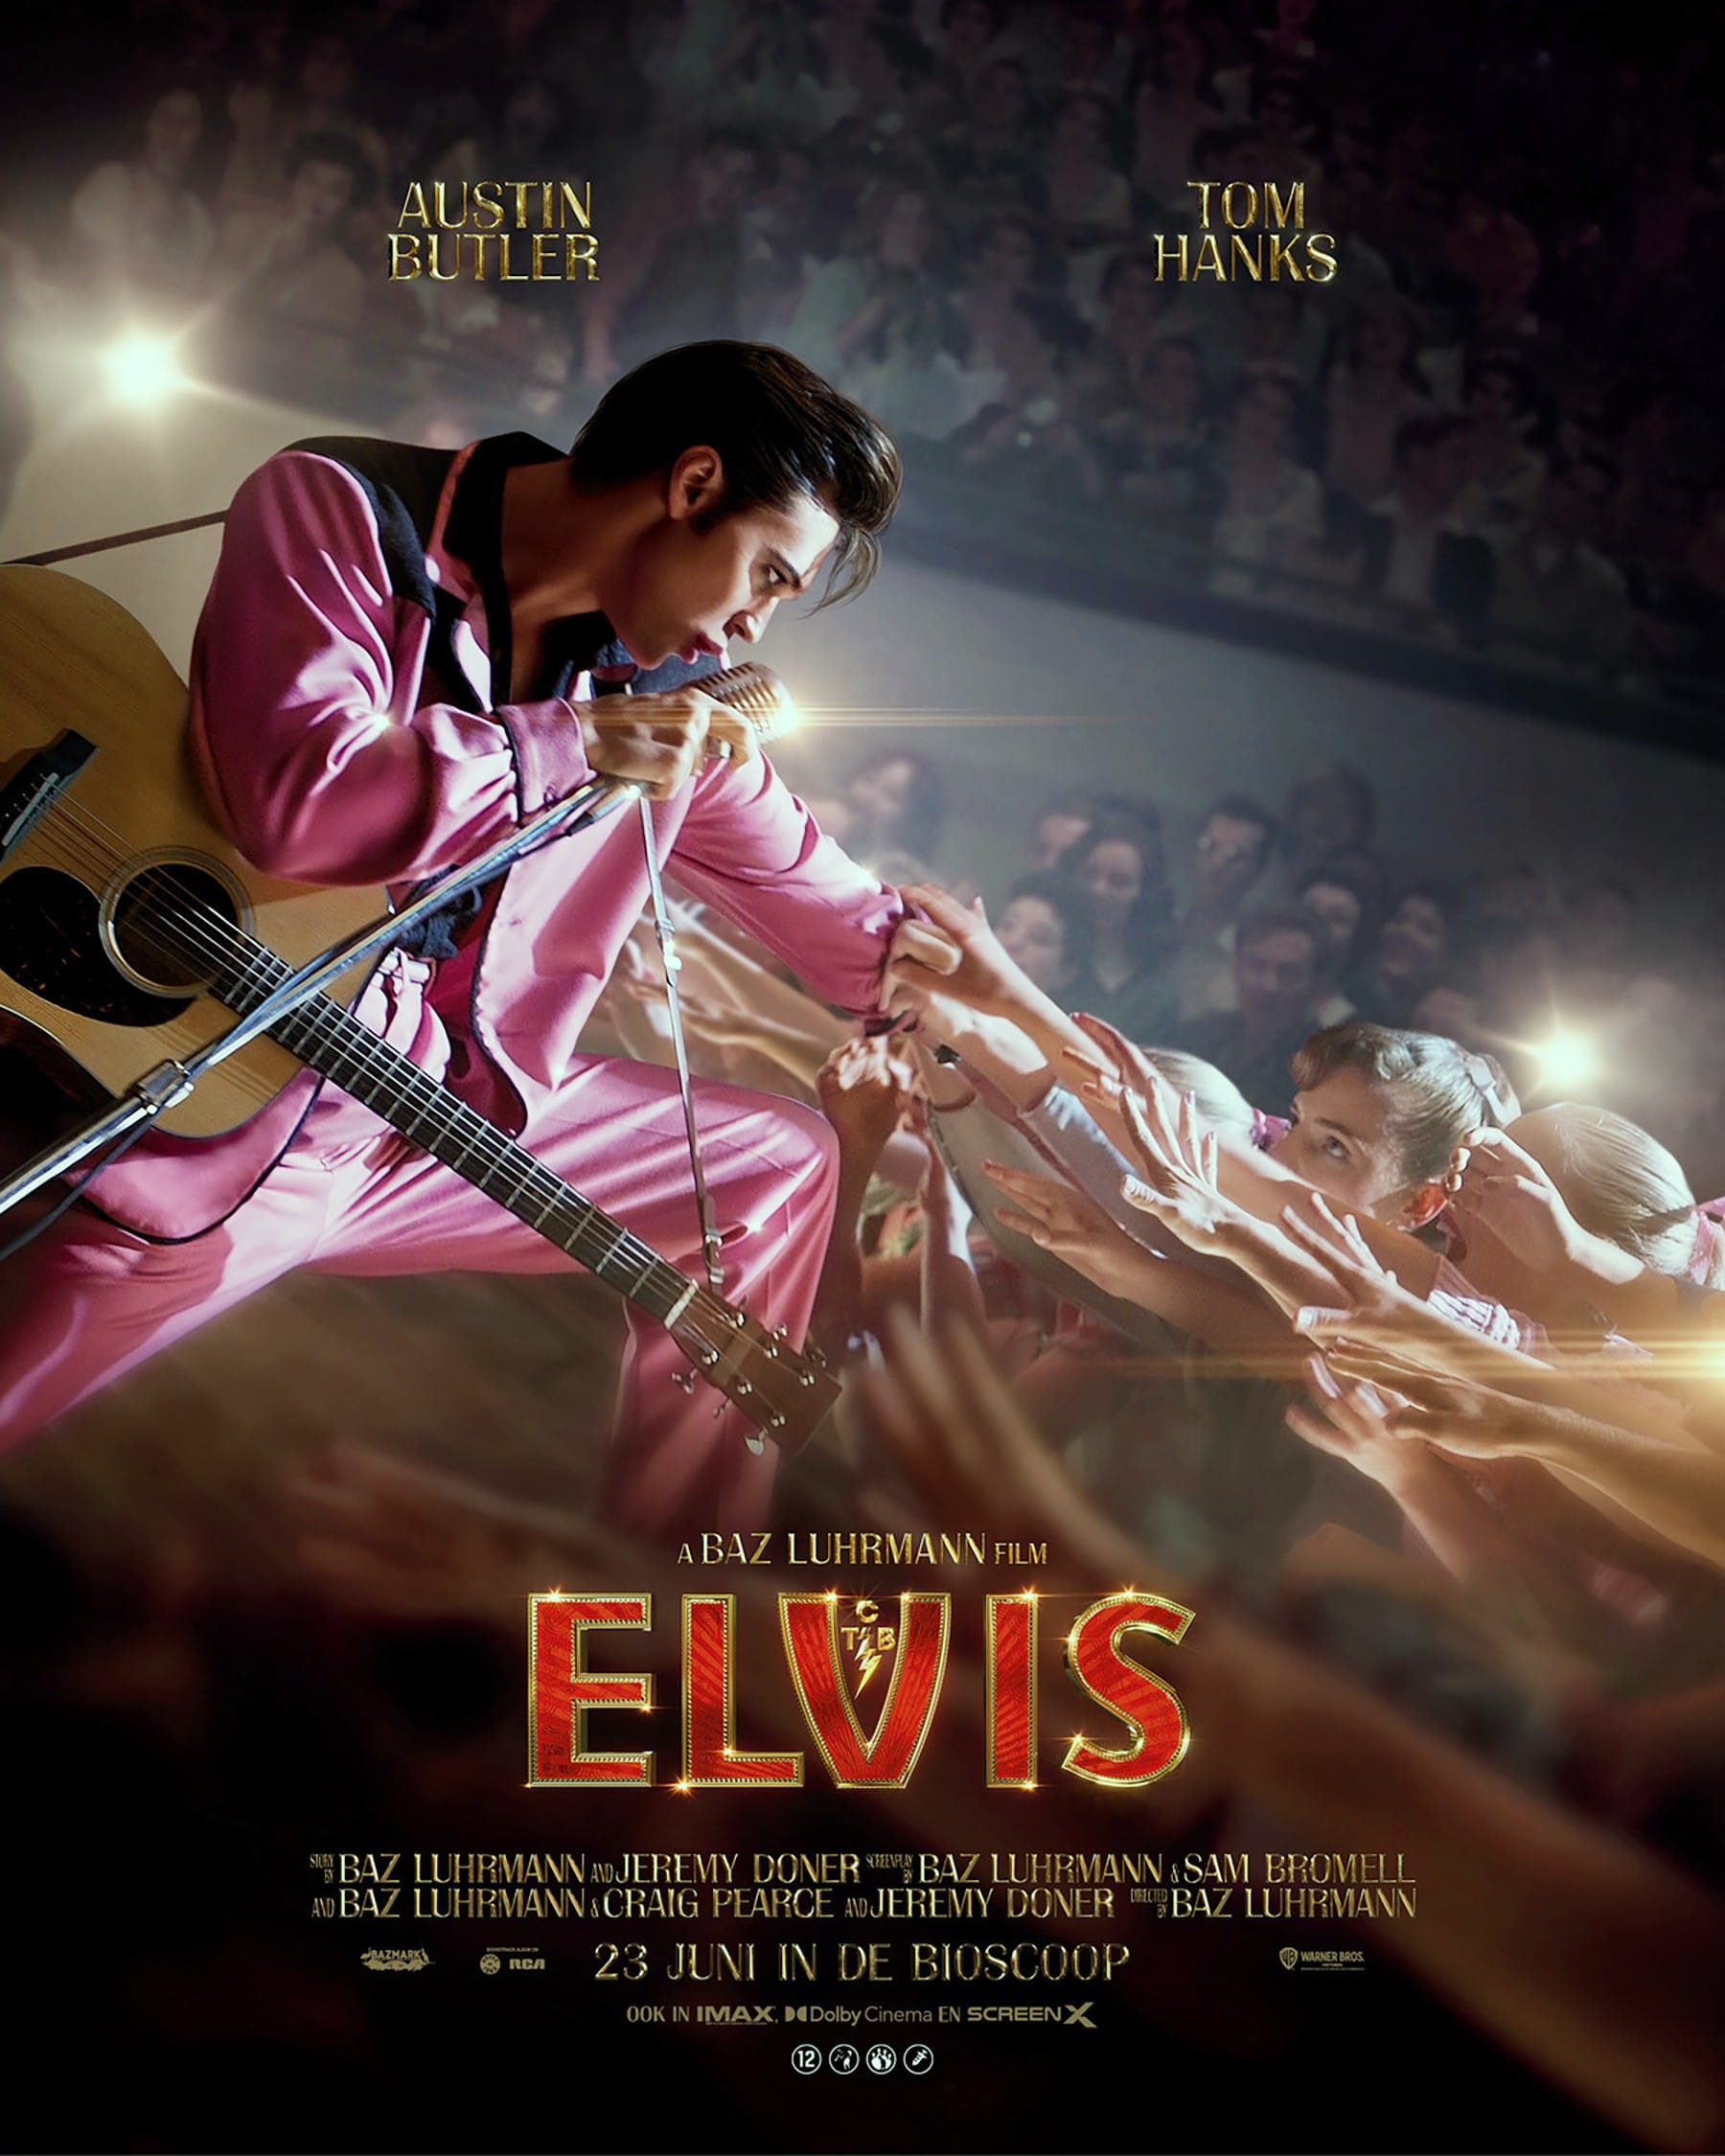 ELVIS, poster in Dutch and English, Austin Butler as Elvis Presley, 2022